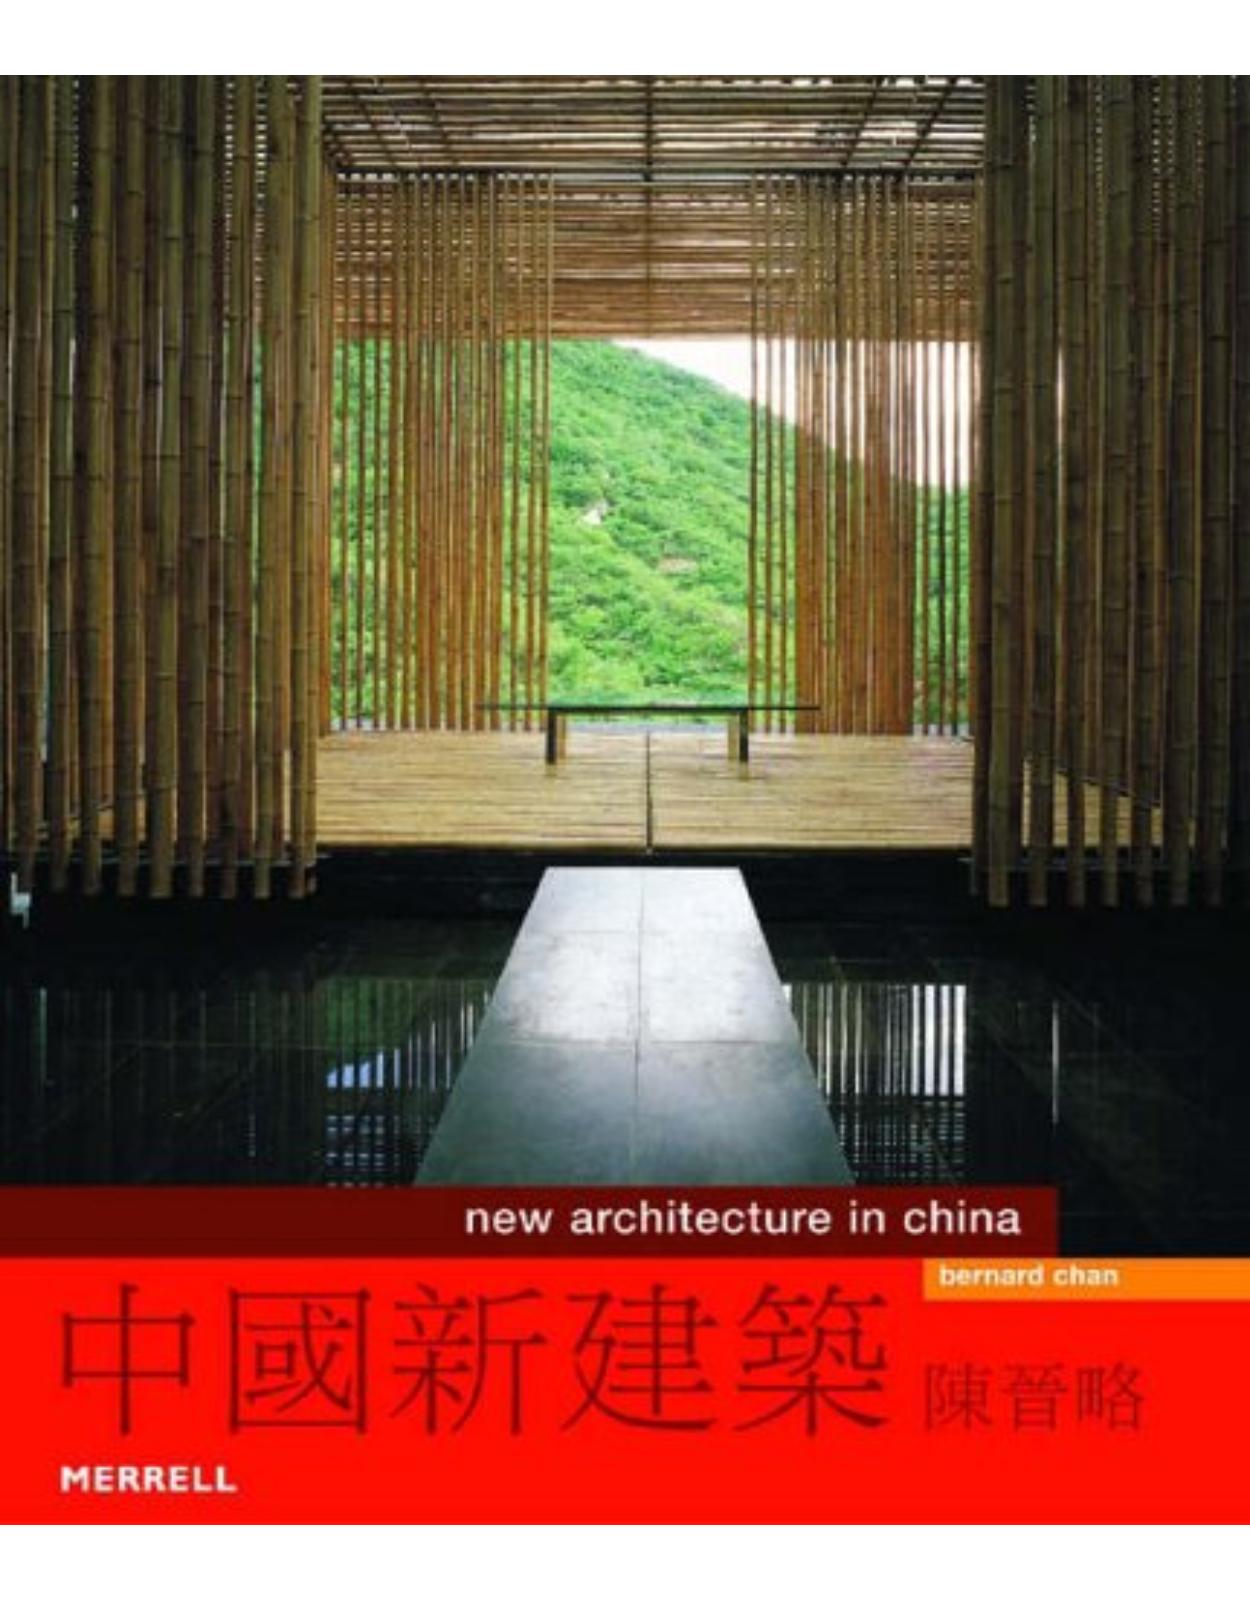 New architecture in China